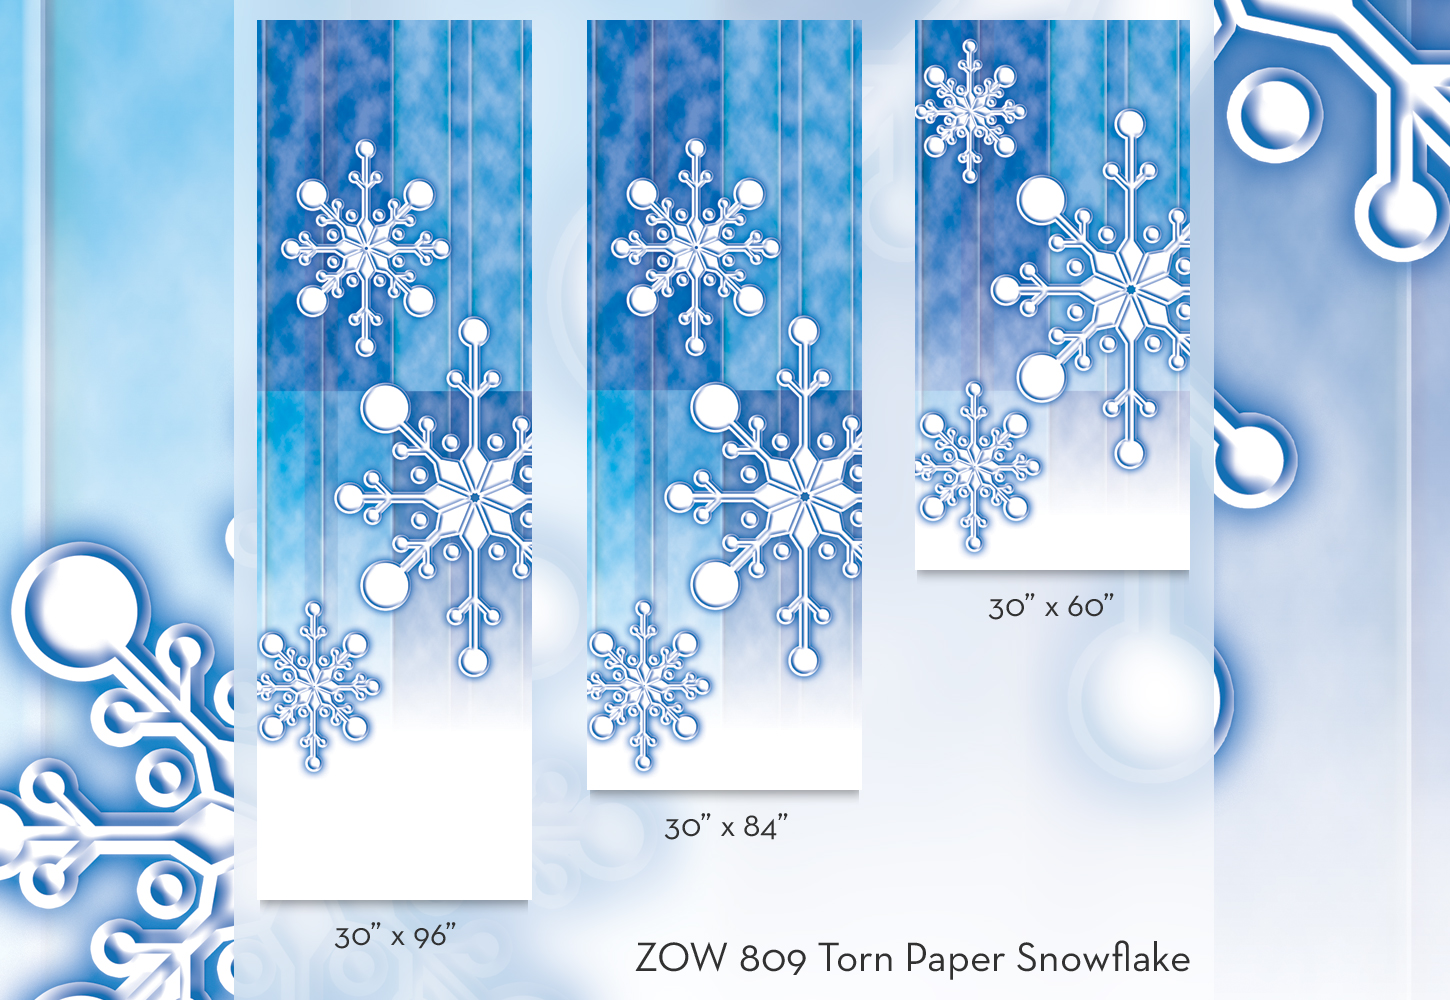 ZOW 809 Torn Paper Snowflake